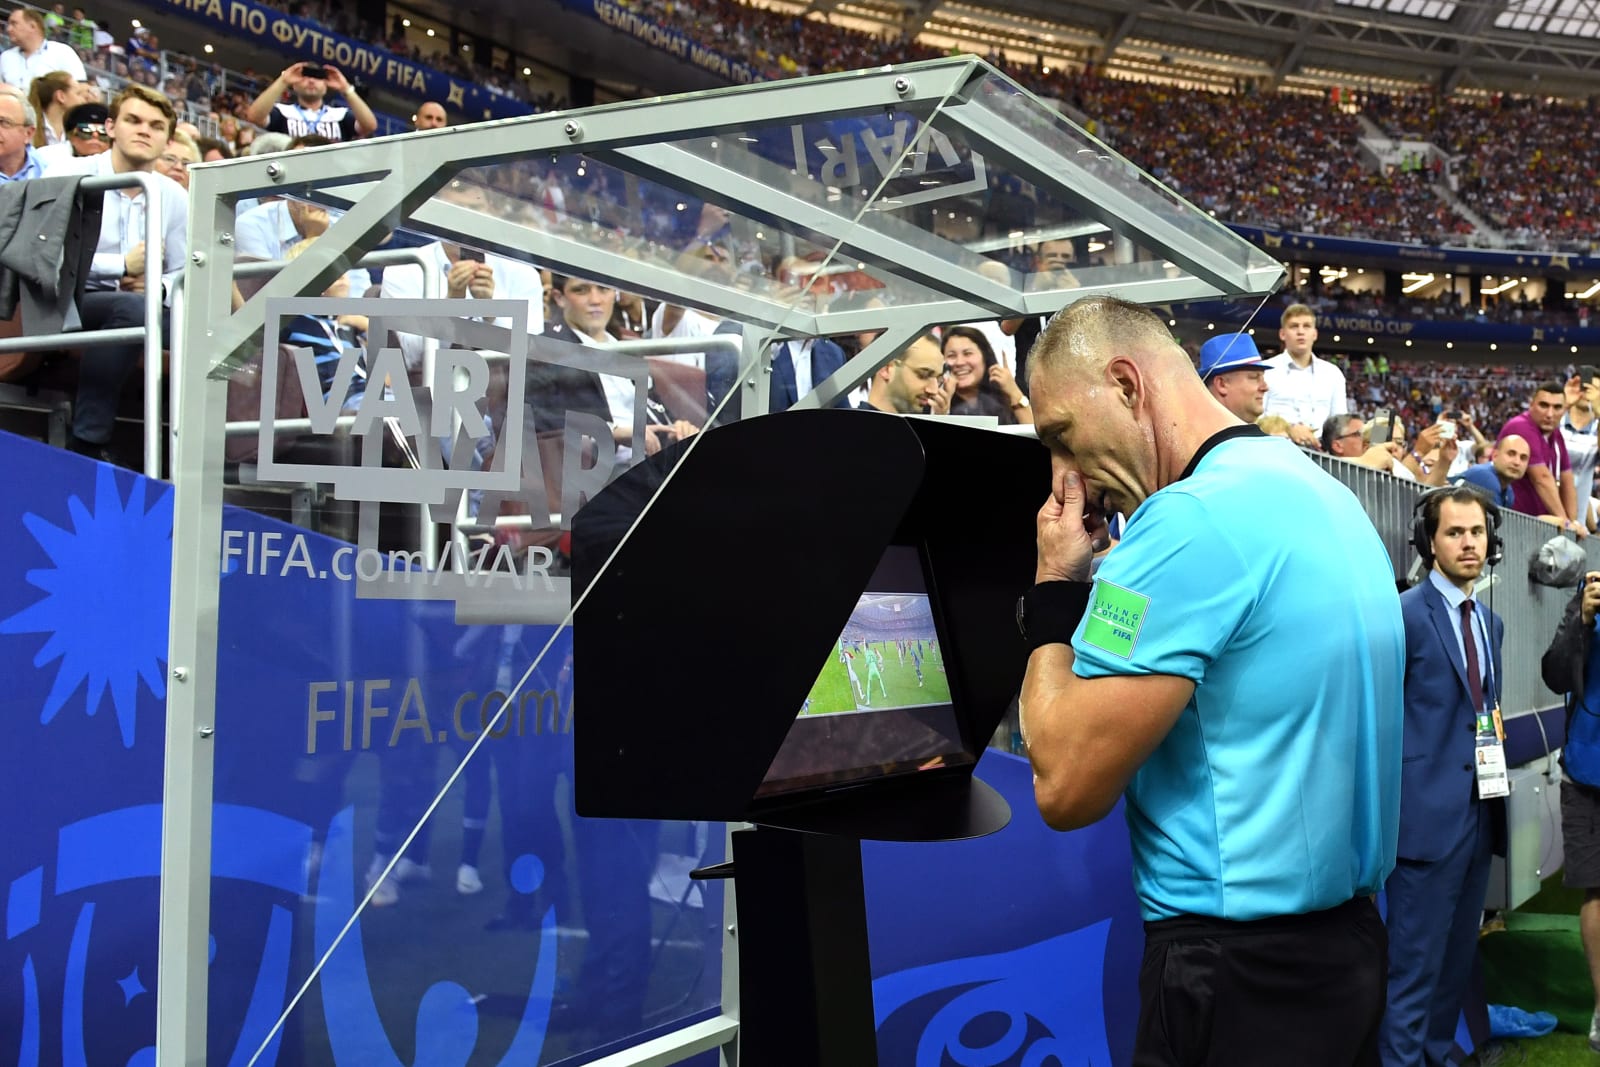 The World Cup showed how VAR will shape soccer's future | Engadget